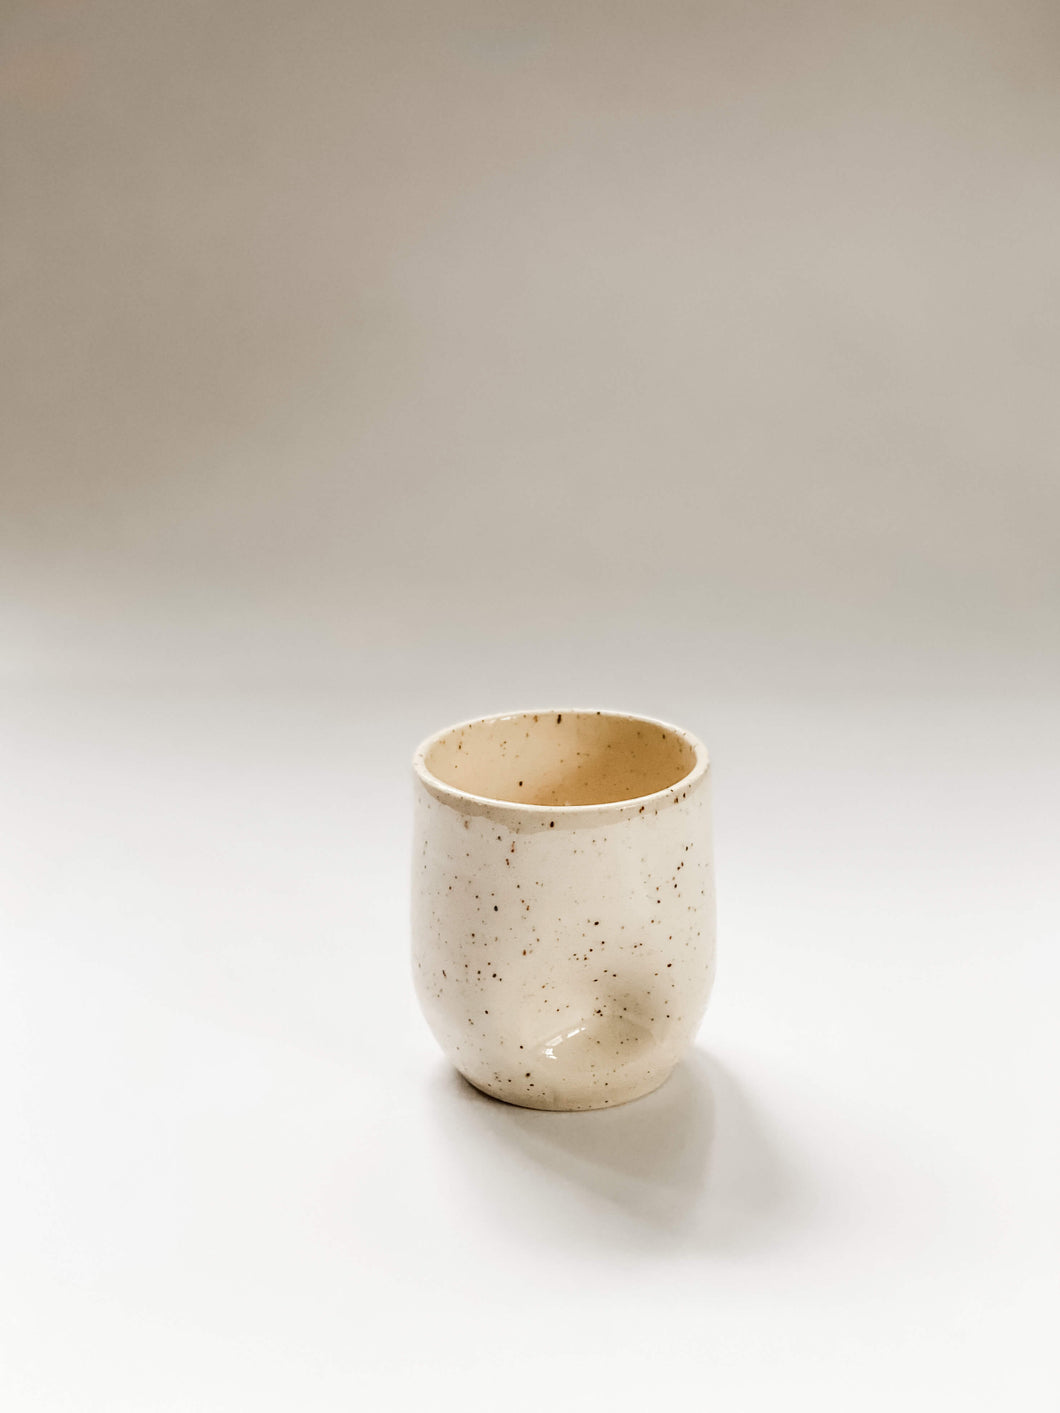 A wheel thrown tumbler in cream clay with speckles with two dimples pinched into the sides